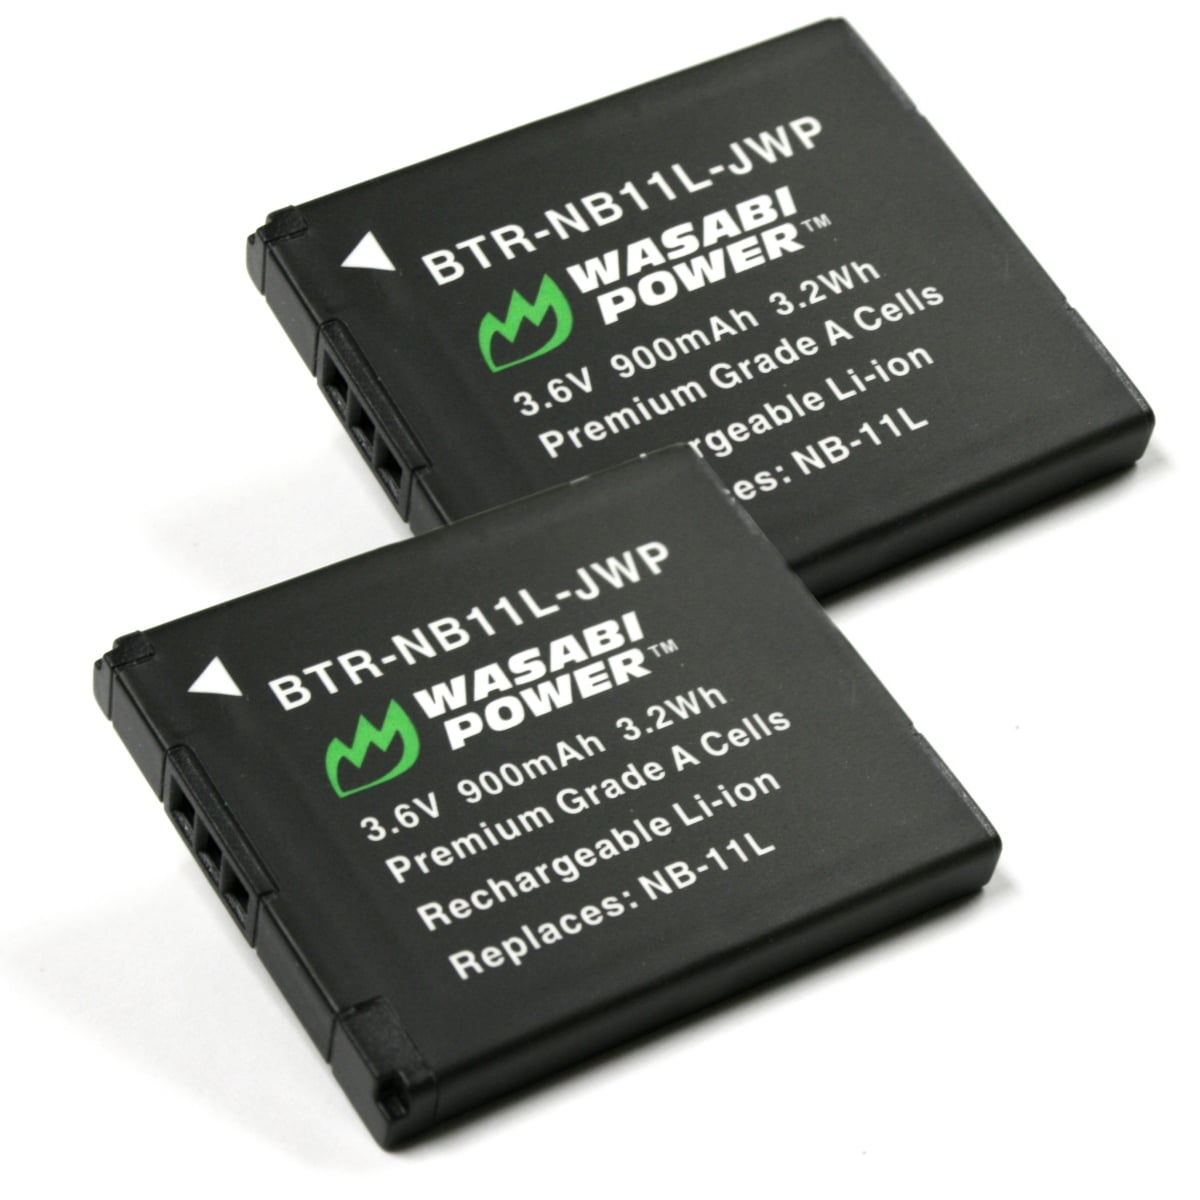 2X Pack Replacement for Canon NB-11L Digital Camera Battery 680mAh, 3.6V, Lithium-Ion Canon A2600 Battery 